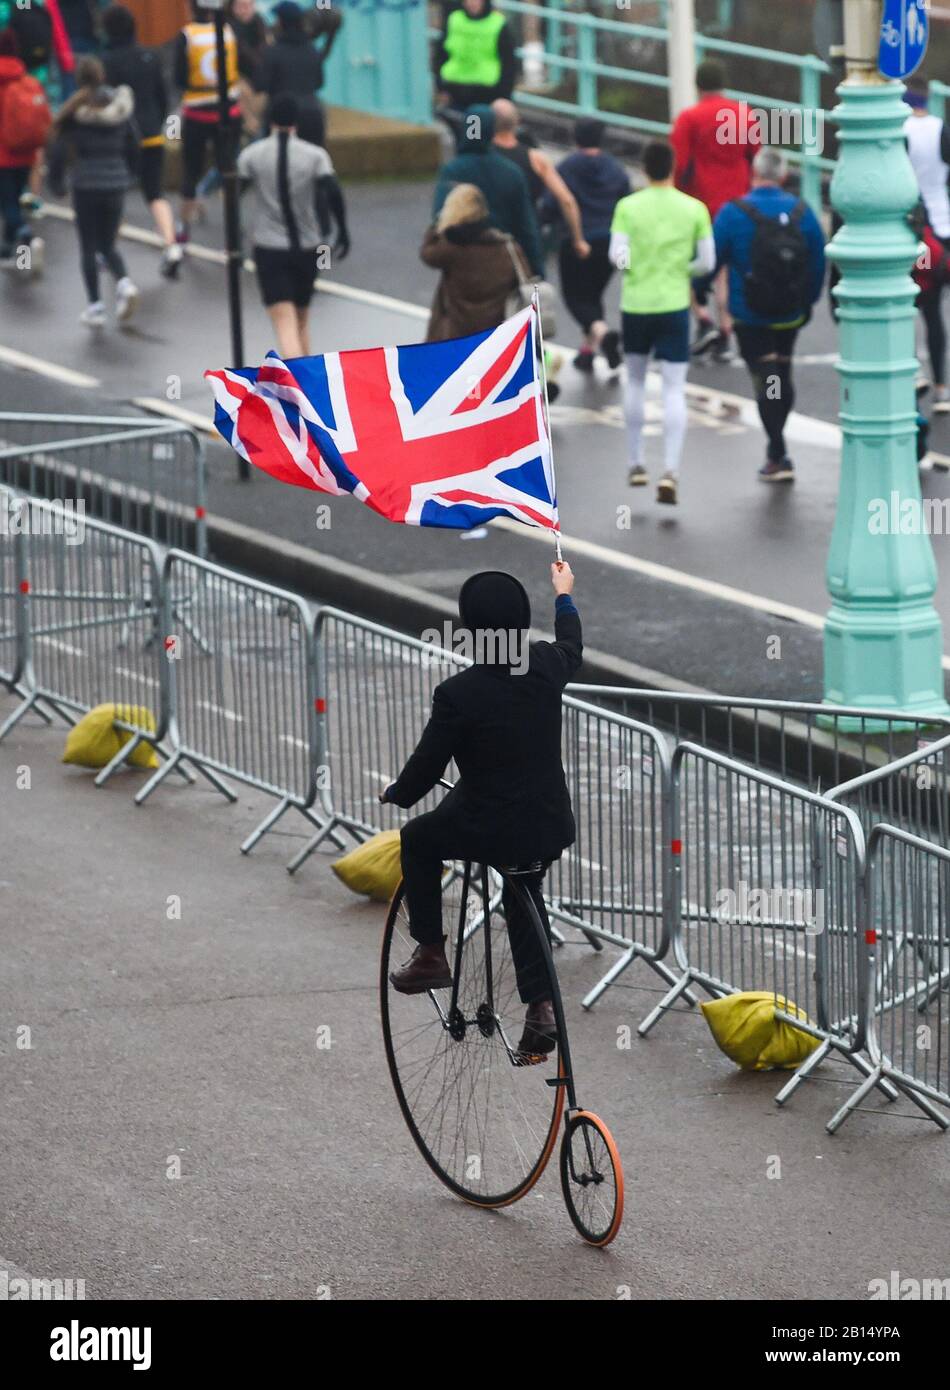 Brighton UK 23rd February 2020 - A penny farthing cyclist makes his way to the start  of The Grand Brighton Half Marathon in wet and windy weather conditions . Over ten thousand runners took part and this years official charity partners is The Sussex Beacon which provides specialist care and support for people living with HIV  : Credit Simon Dack / Alamy Live News Stock Photo